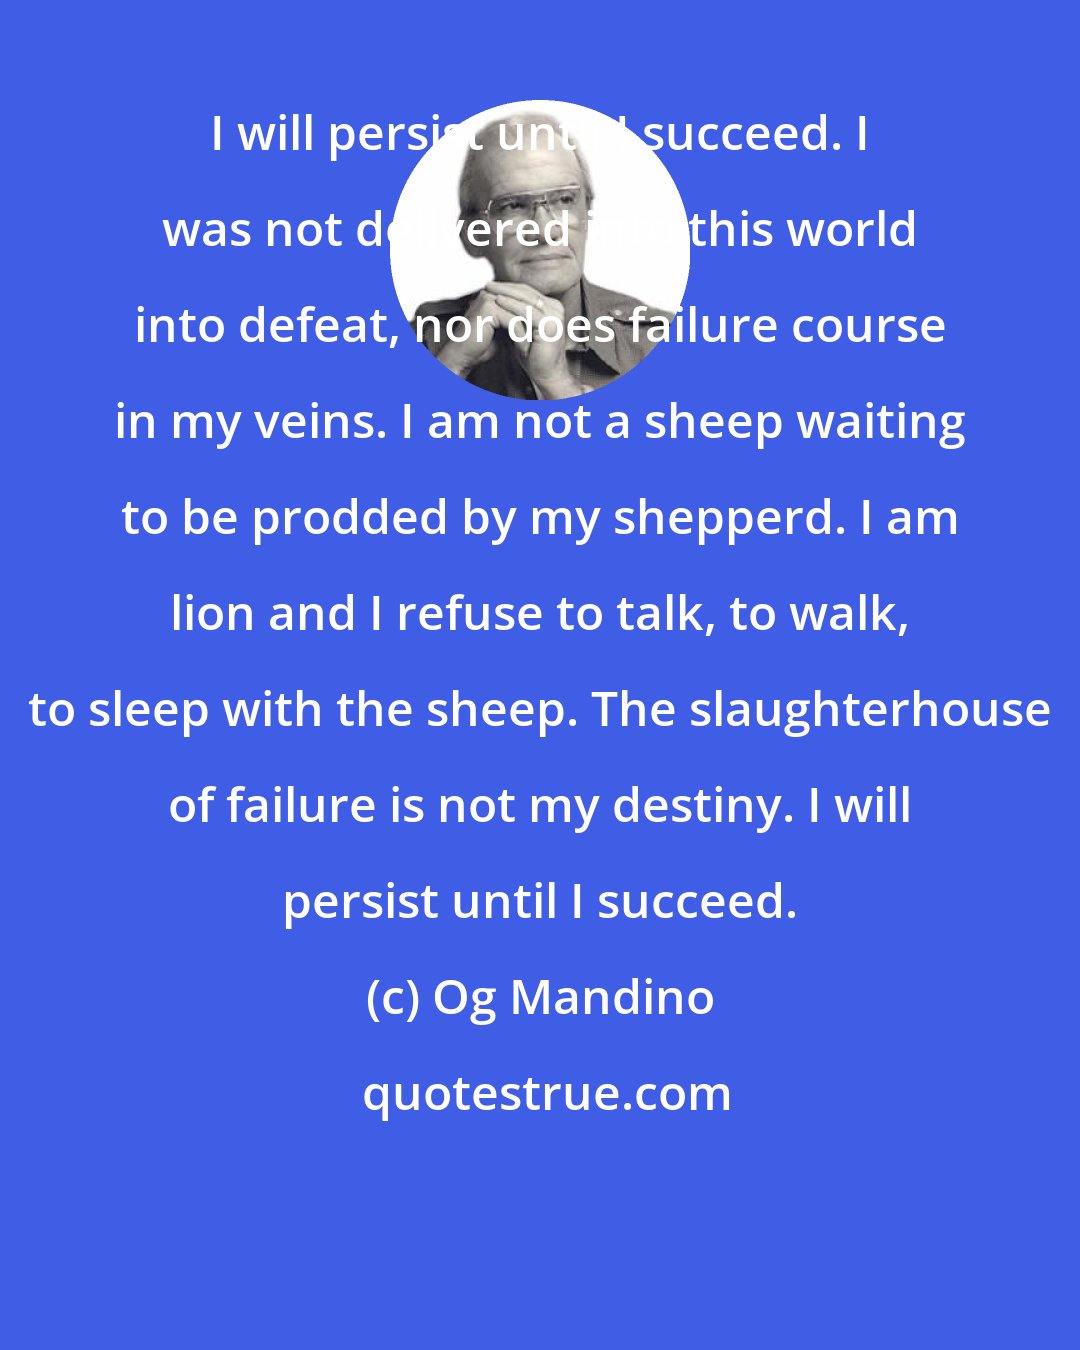 Og Mandino: I will persist until I succeed. I was not delivered into this world into defeat, nor does failure course in my veins. I am not a sheep waiting to be prodded by my shepperd. I am lion and I refuse to talk, to walk, to sleep with the sheep. The slaughterhouse of failure is not my destiny. I will persist until I succeed.